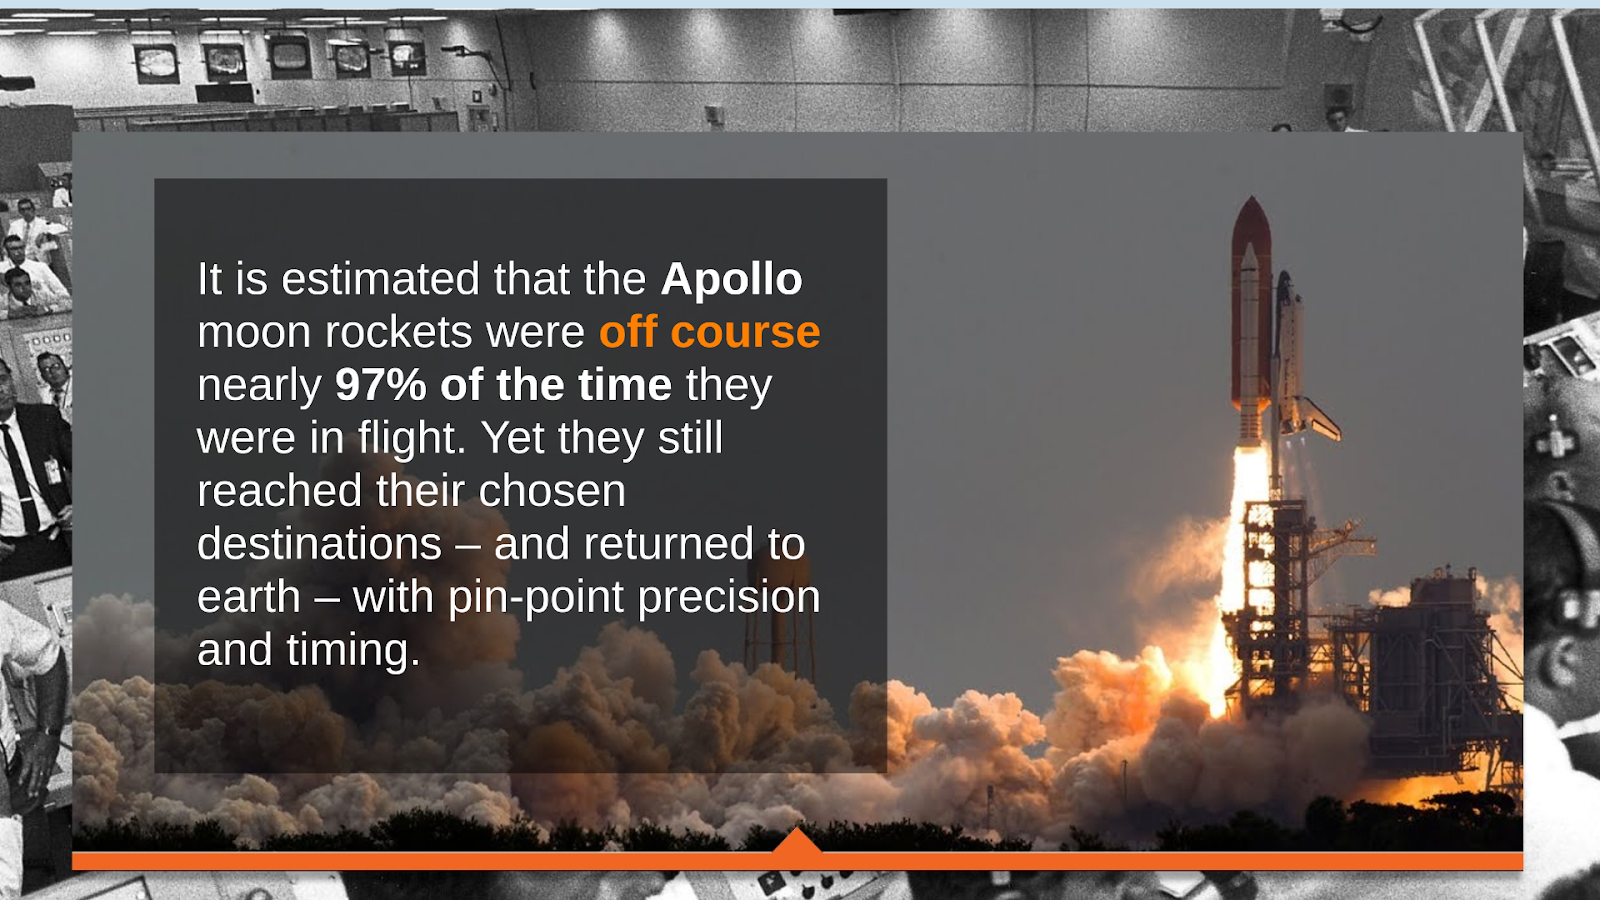 The apollo rocket taking off with text saying how it was off course 97% of the time it was in flight. 